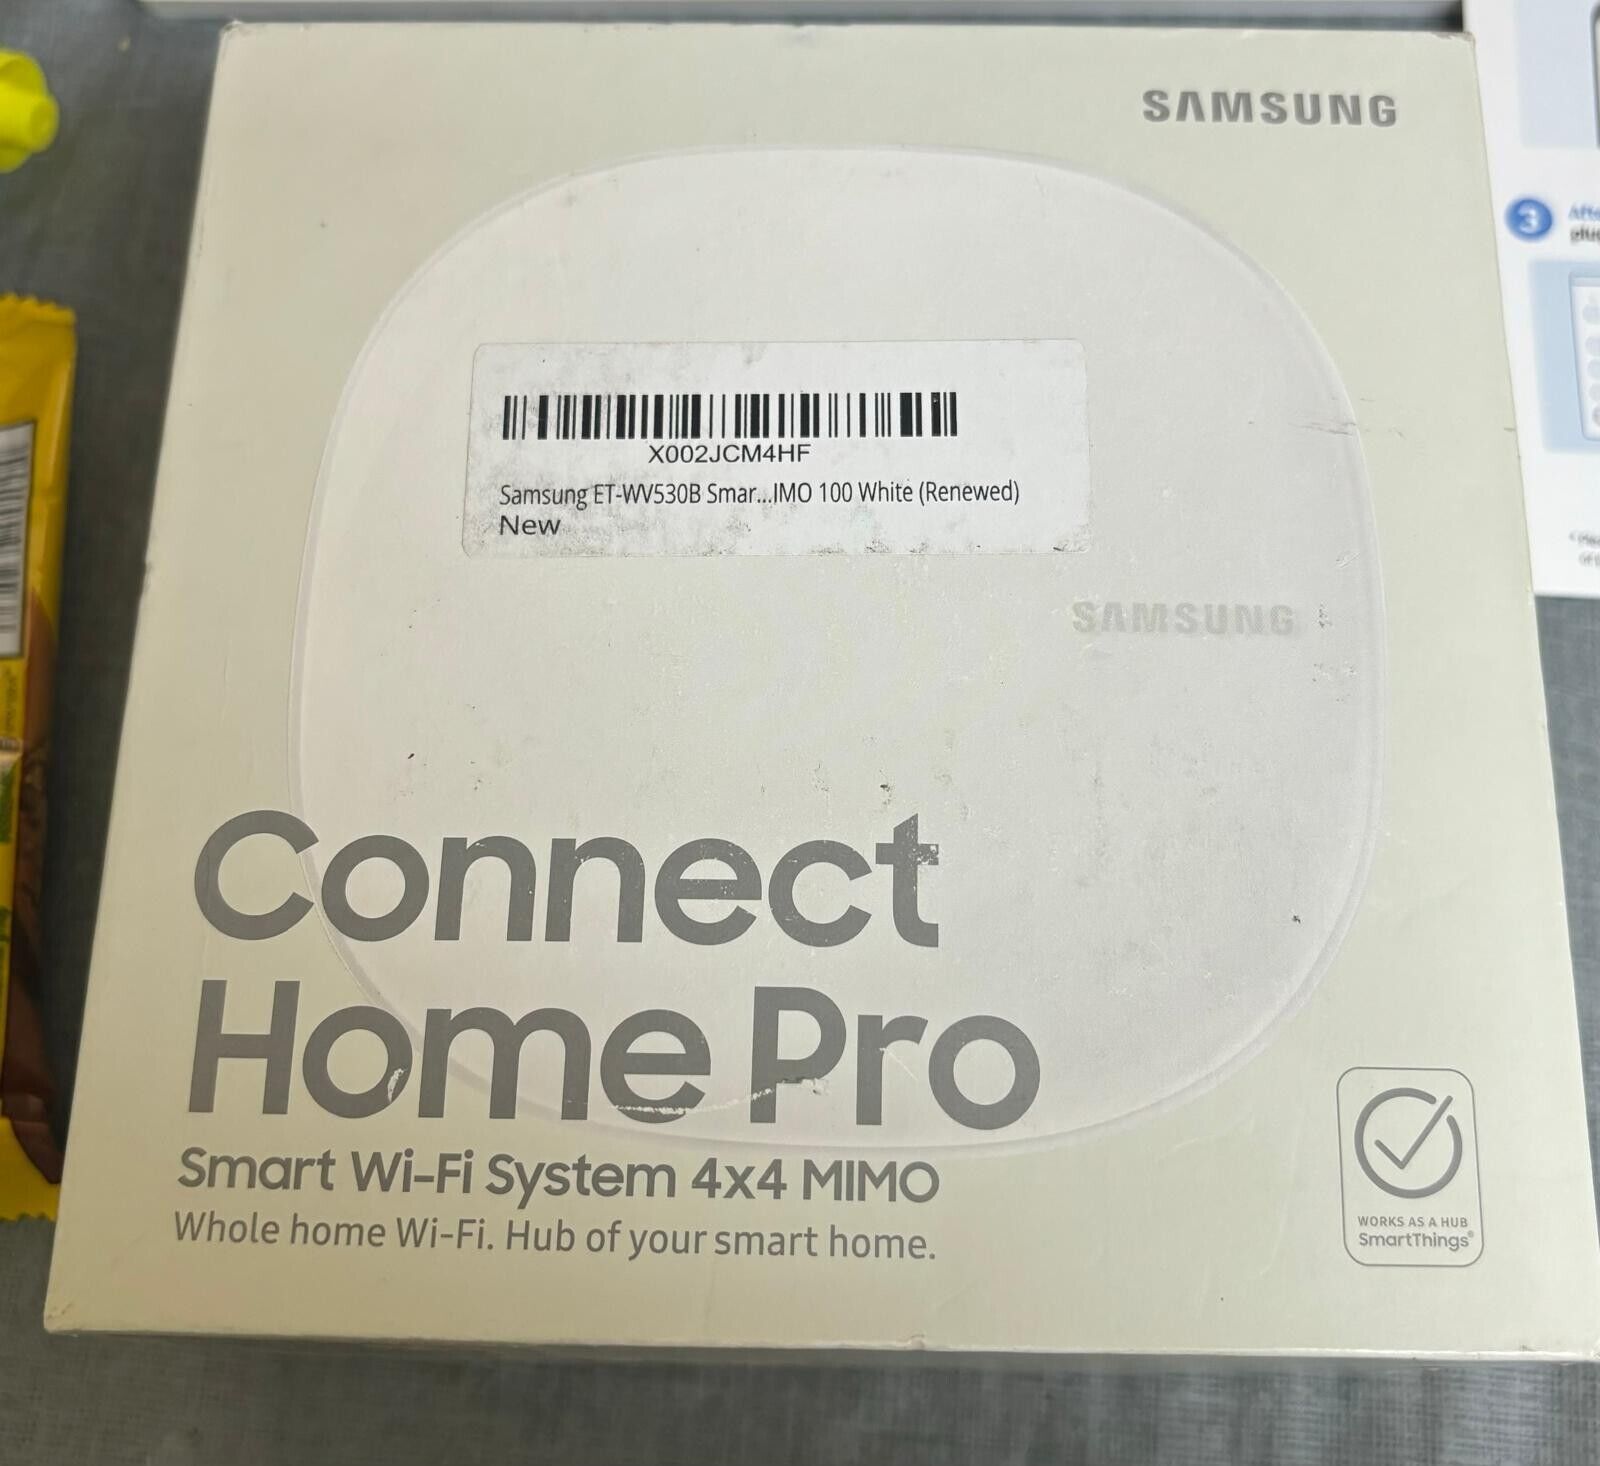 Samsung Connect Home Pro Smart Wi-Fi System 4x4 MIMO - ET-WV530BWEGUS OPEN BOX